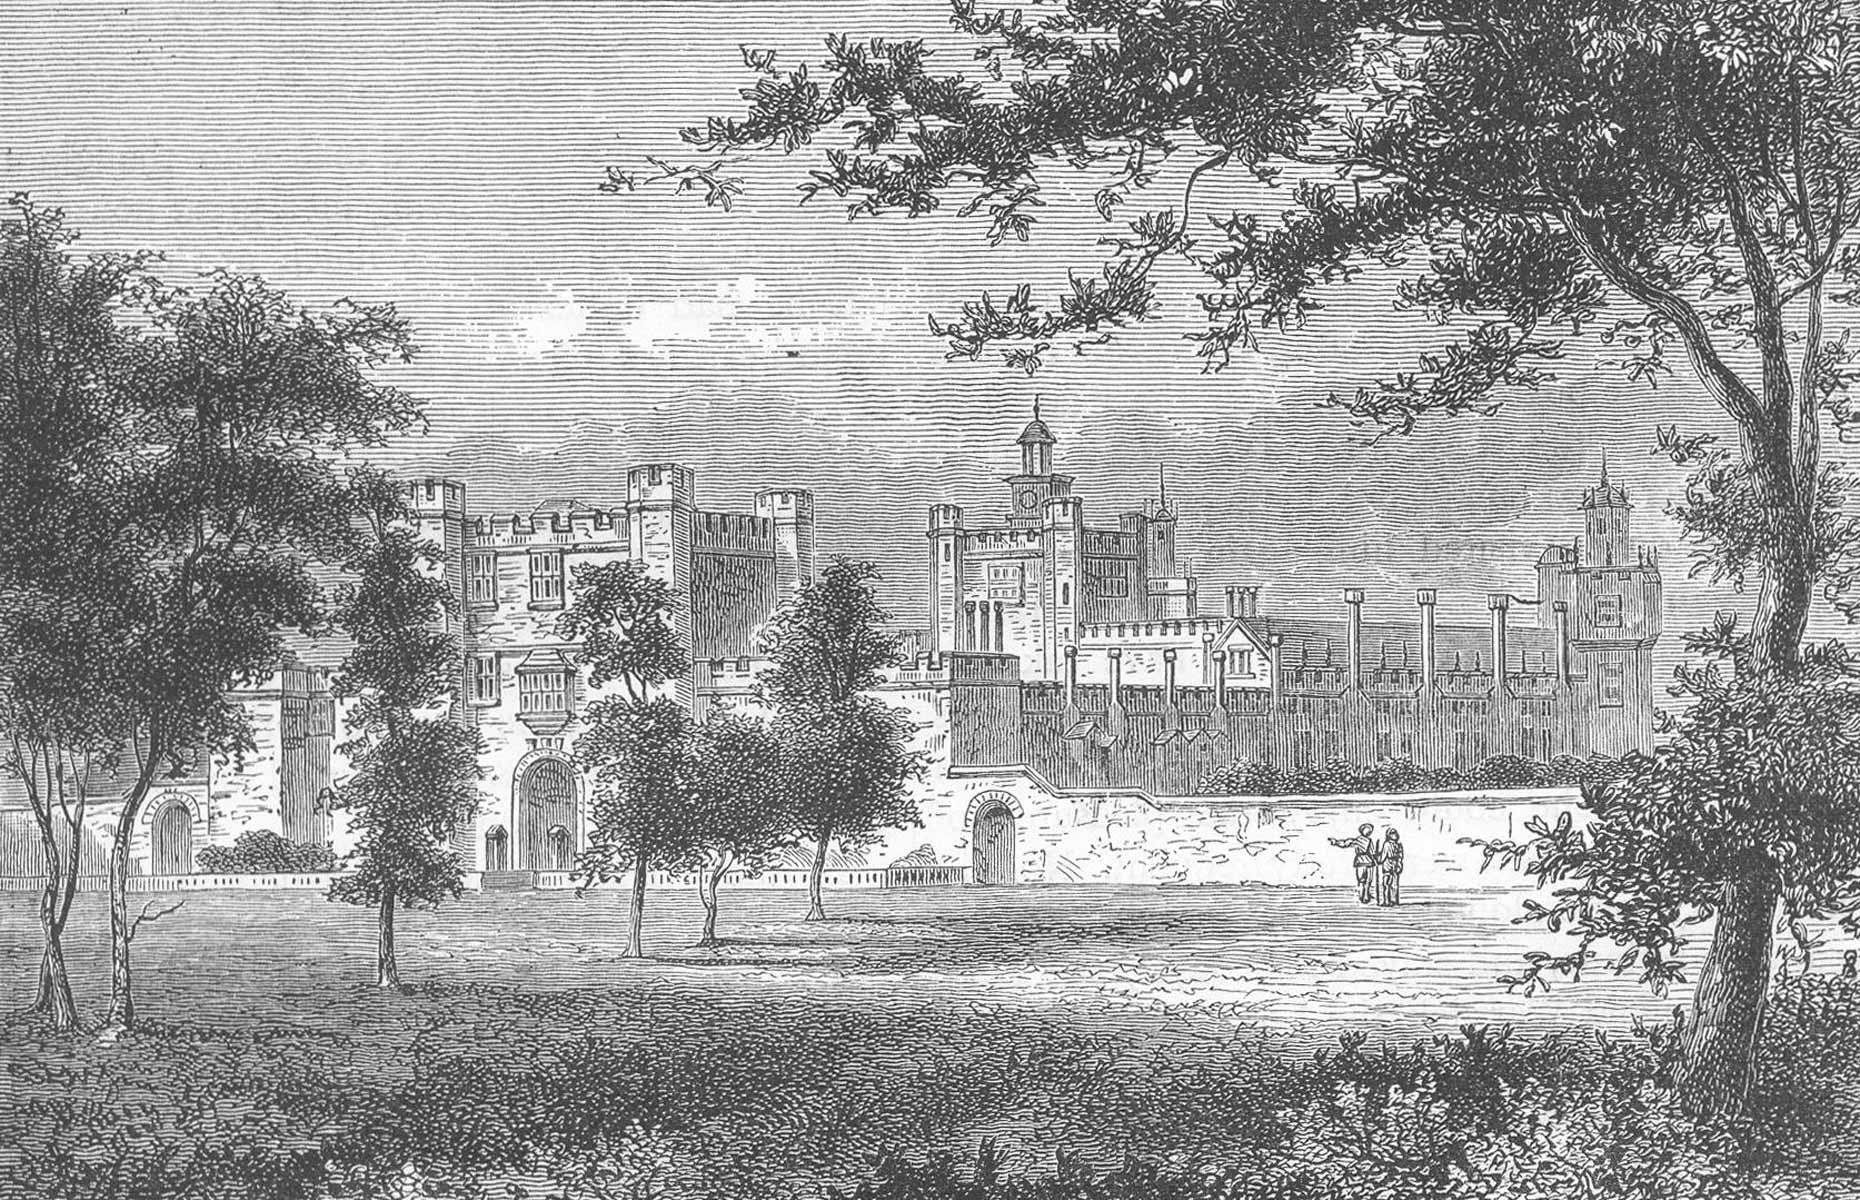 <p>For an example of Cecil's eagerness to impress Queen Elizabeth I, we must quickly divert from Burghley and visit his other home of Theobalds (pronounced Tibalds and pictured here in around 1836). Cecil acquired the manor in 1564 and had a house built, which soon received a visit from Elizabeth. She was impressed by the house and its surroundings but during a stay, <a href="http://www.stamfordsightsandsecretstours.com/virtual-tour-william-cecil/tag/the+strand">according to reports</a>, complained that her bedroom was too small.</p>  <p>Of course, this led Cecil to embark on a huge programme of building work. "Upon fault found with the small measure of her chamber (which was in good measure for me), I was forced to enlarge a room for a larger chamber," he wrote in his diaries. </p>